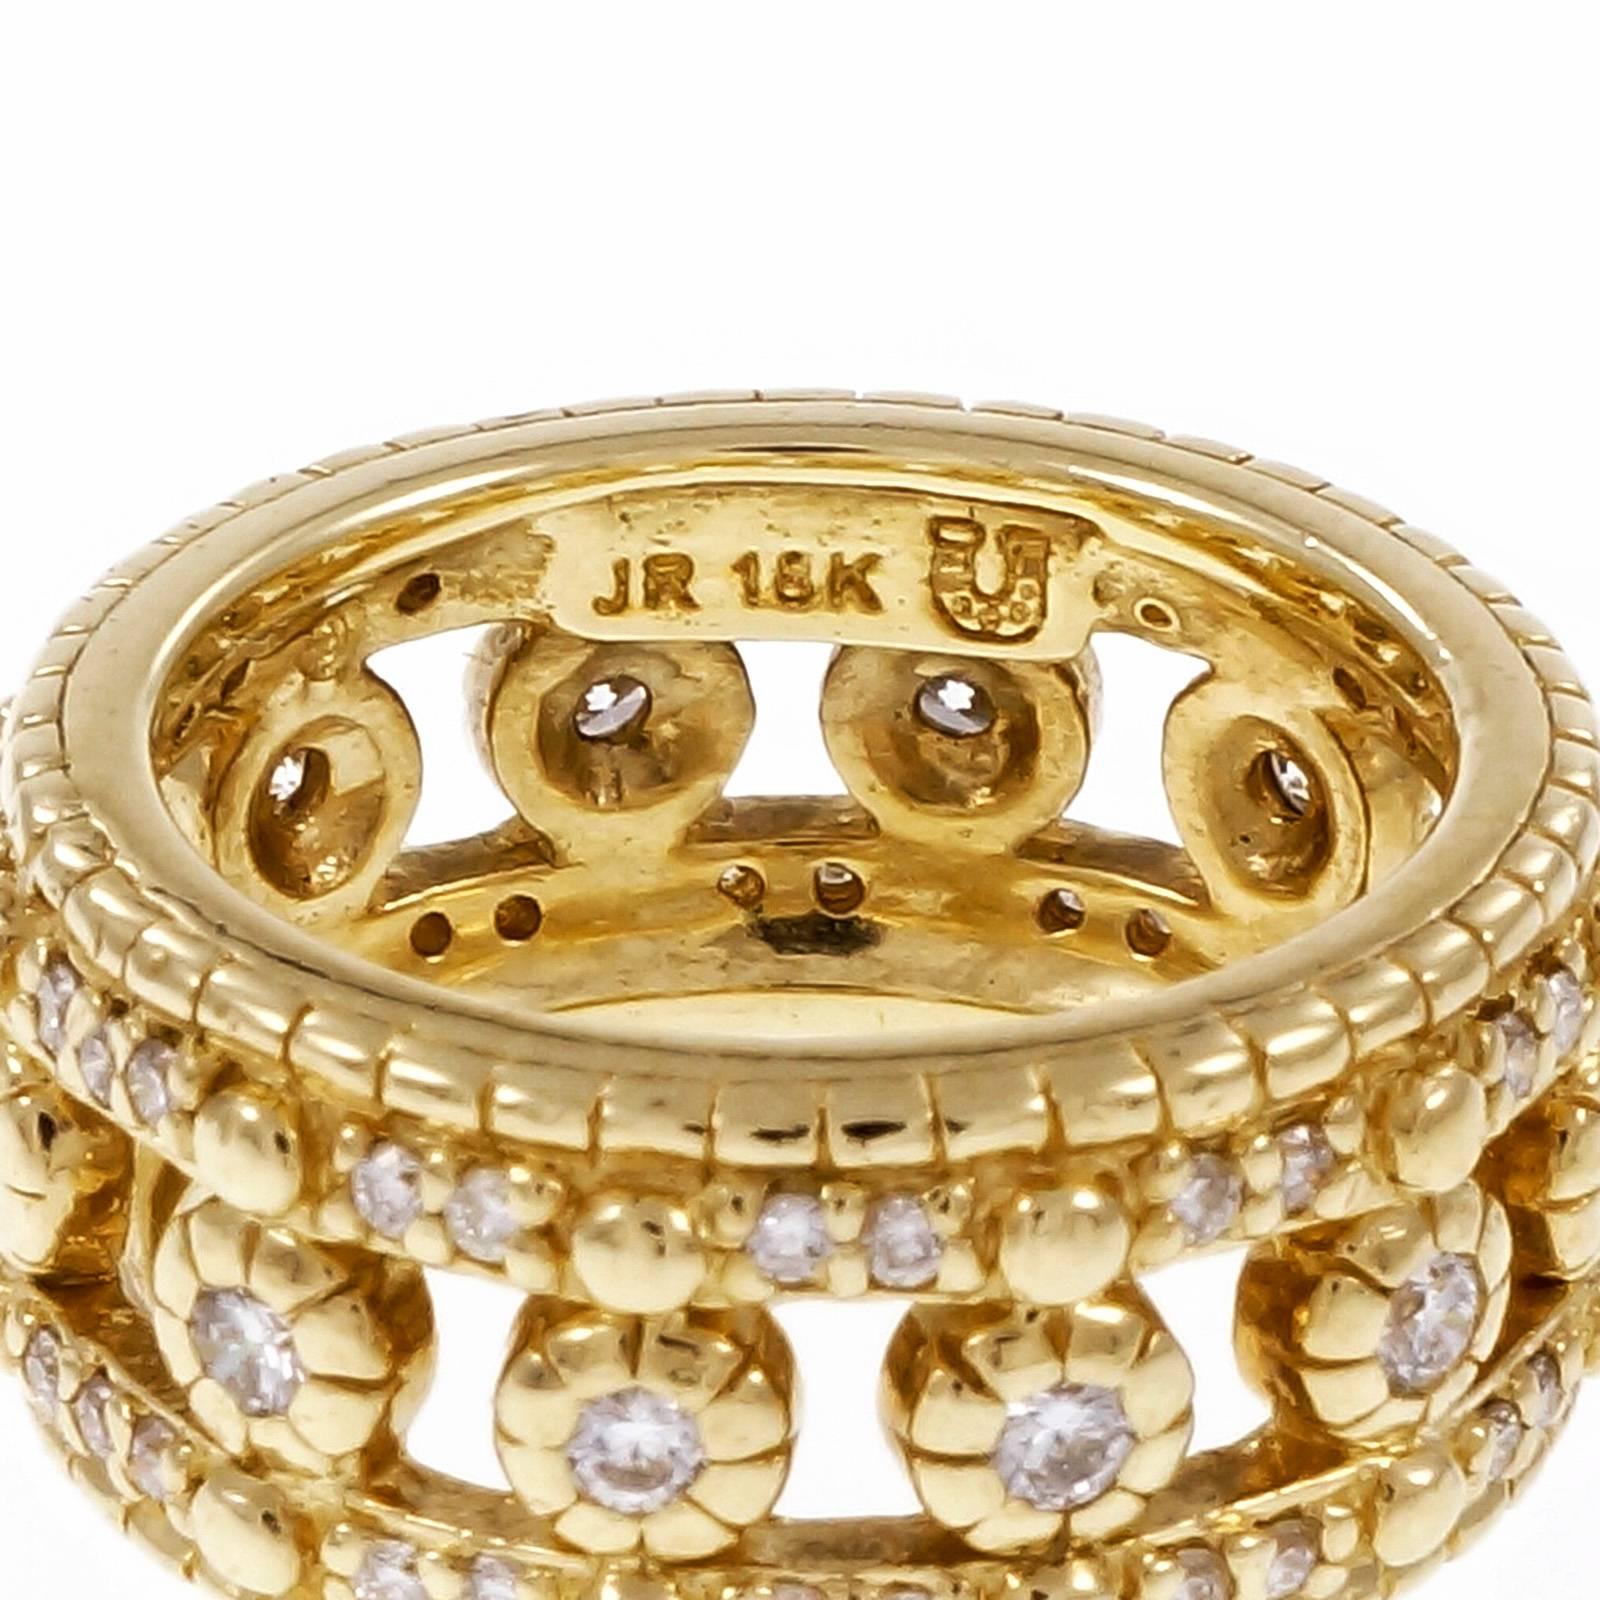 Judith Ripka wide 18k yellow gold diamond Eternity Wedding ring.Size 4 1/2

62 round diamonds, approx. total weight .62cts, H, VS – SI
18k yellow gold
Tested and stamped: 18k
Hallmark: JR
9.3 grams
Width at top: 8.70mm
Height at top: 2.81mm
Width at